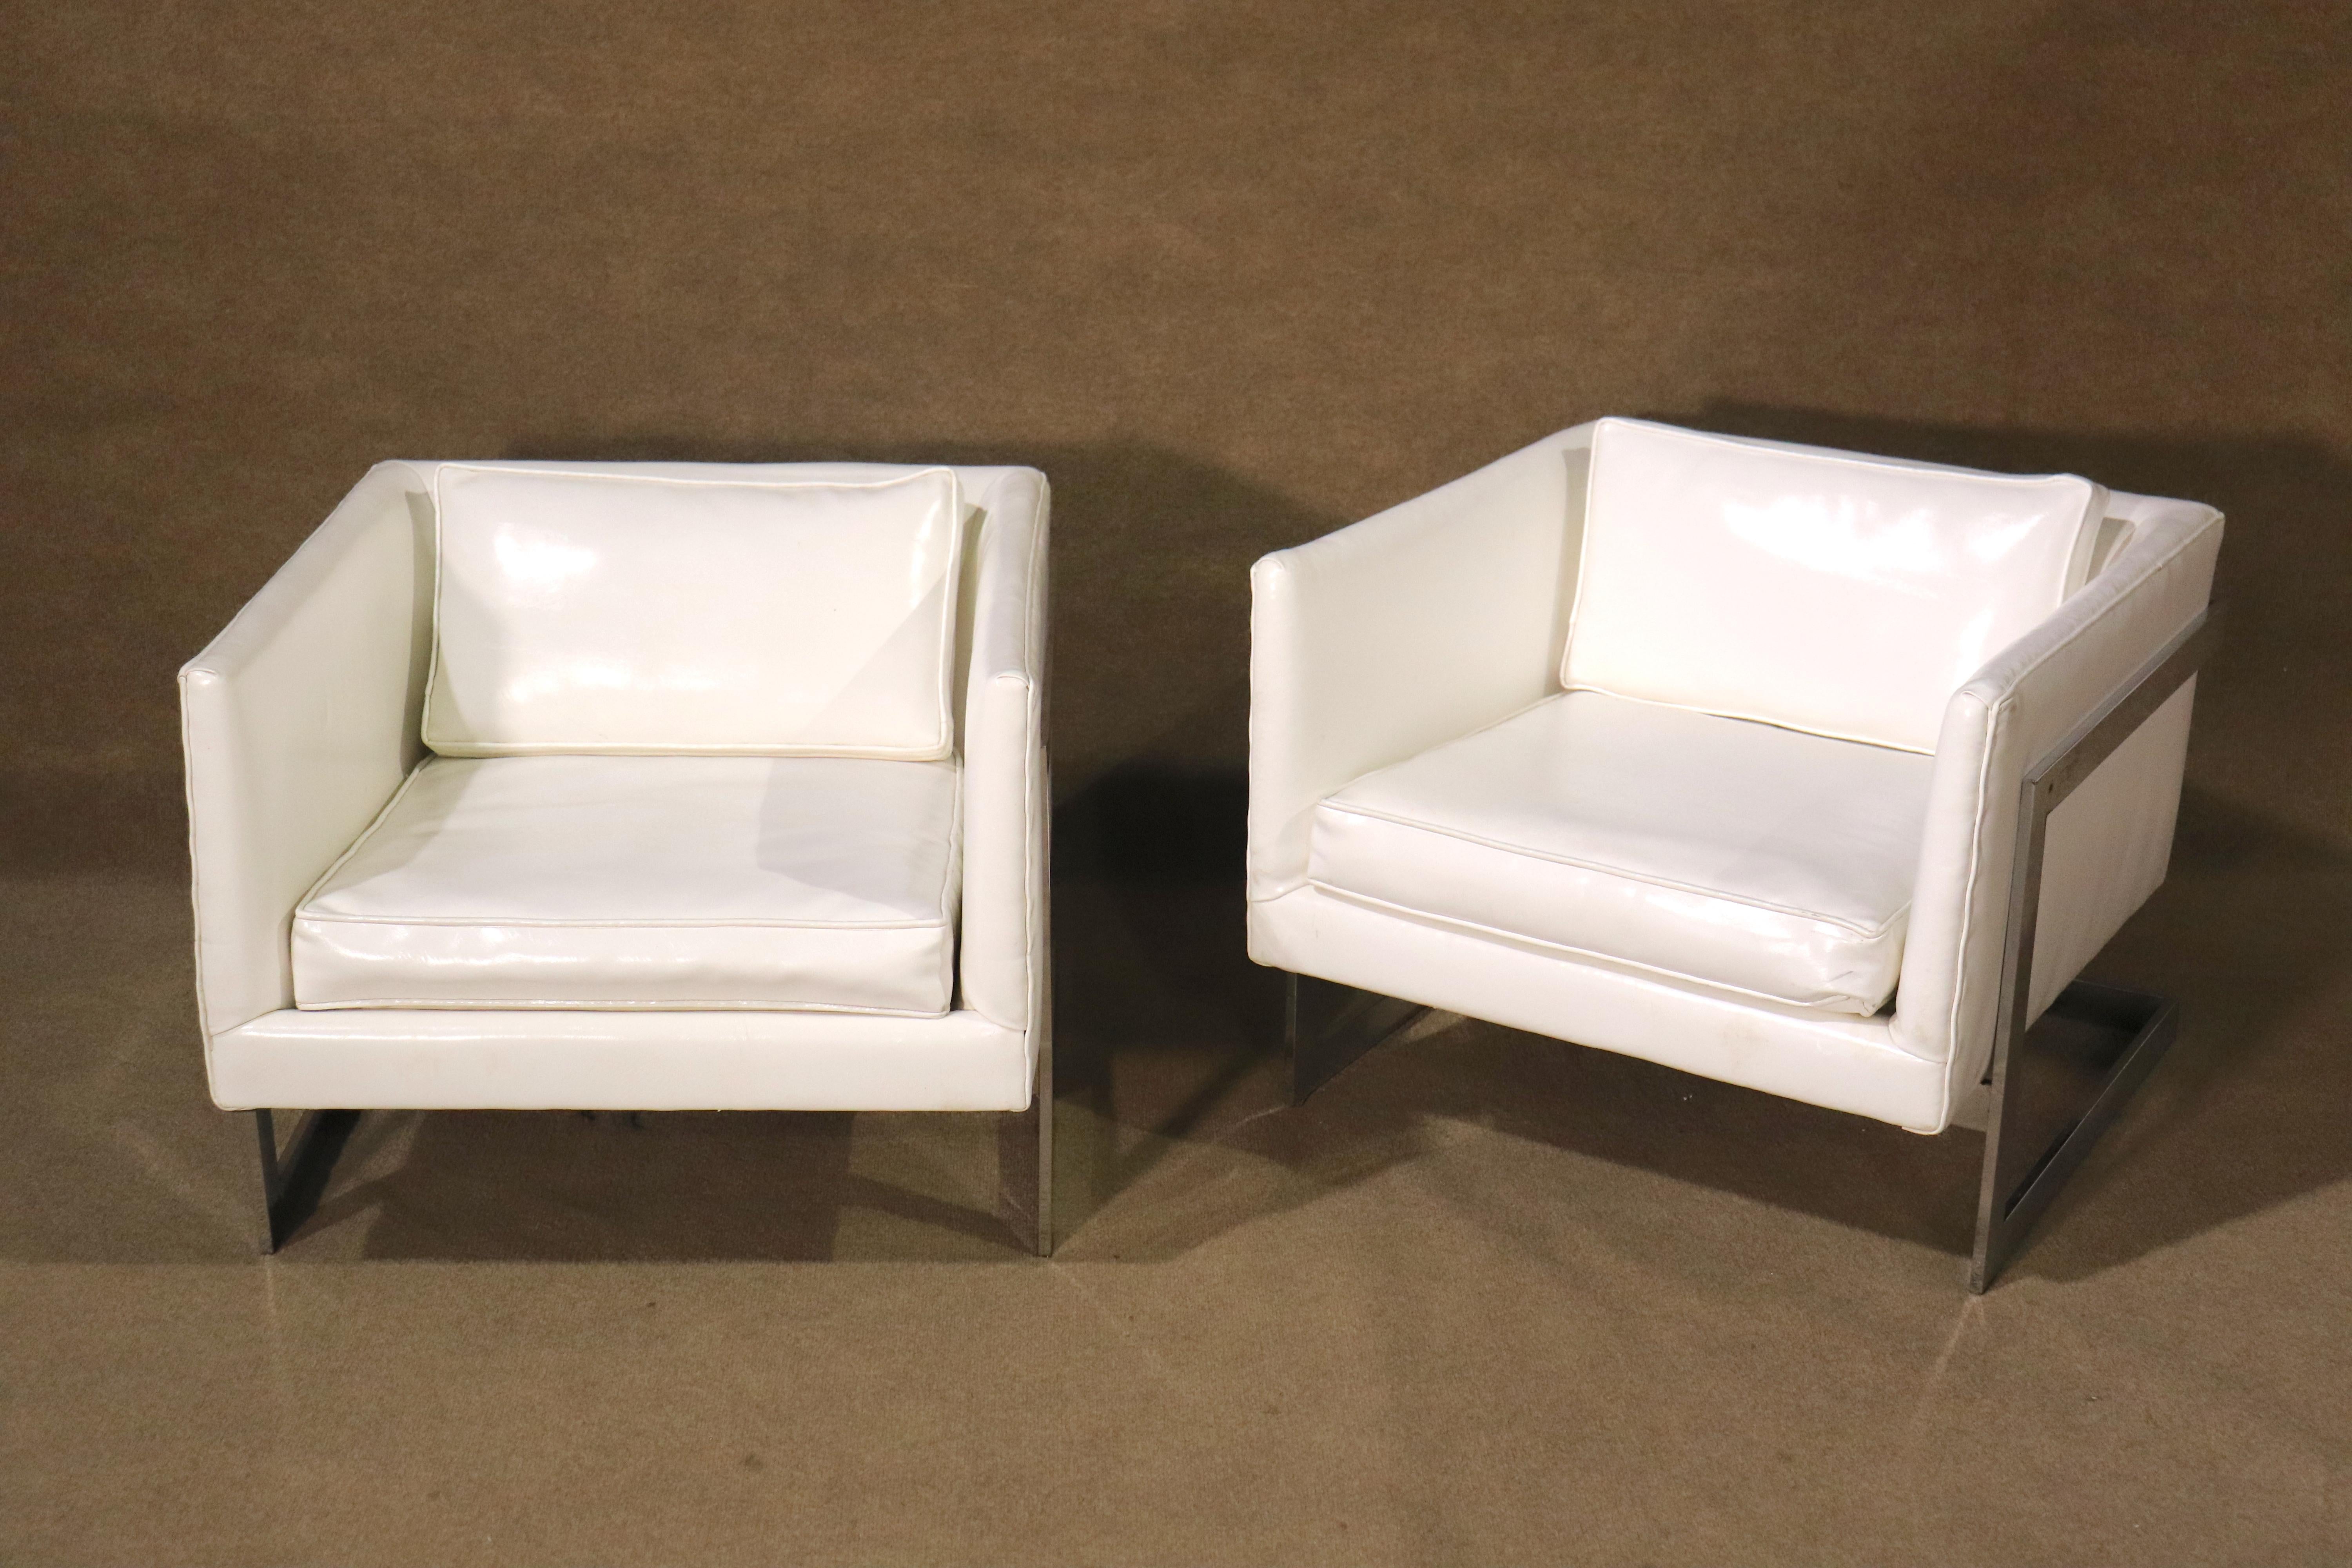 Pair of mid-century modern style lounge chairs with flat chrome frames. Inspired by Milo Baughman's 